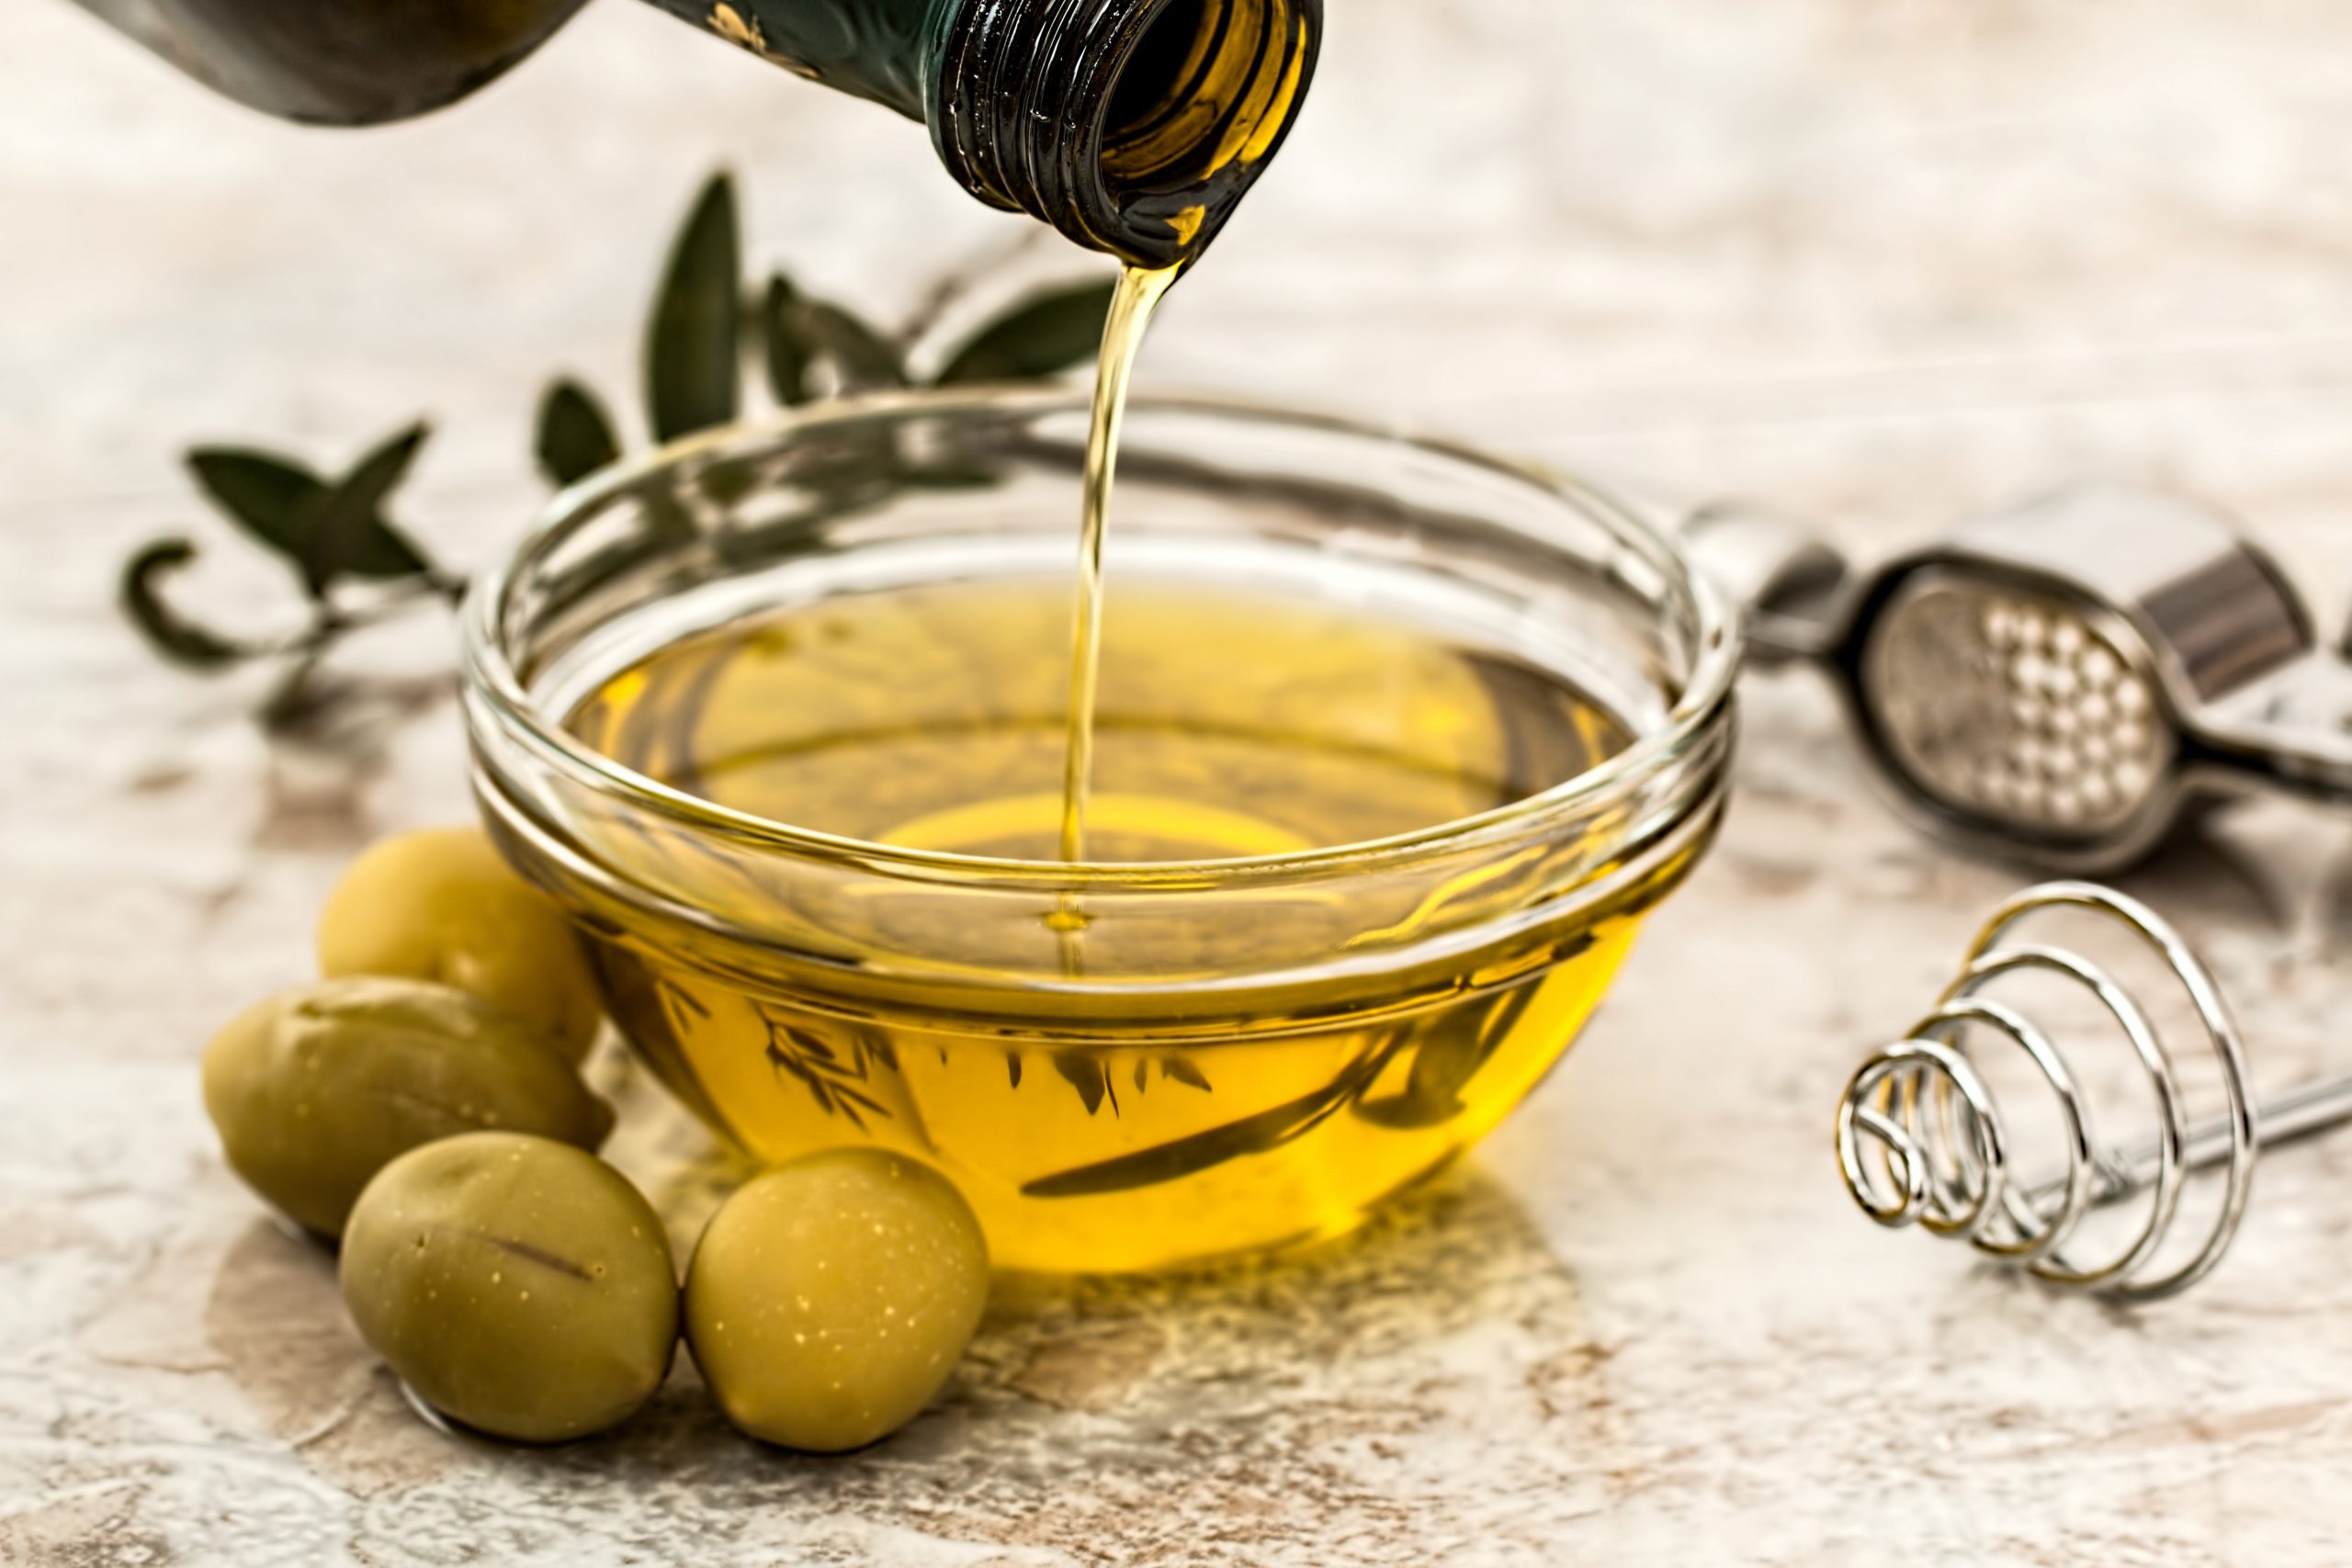 A glass bowl with olive oil in it